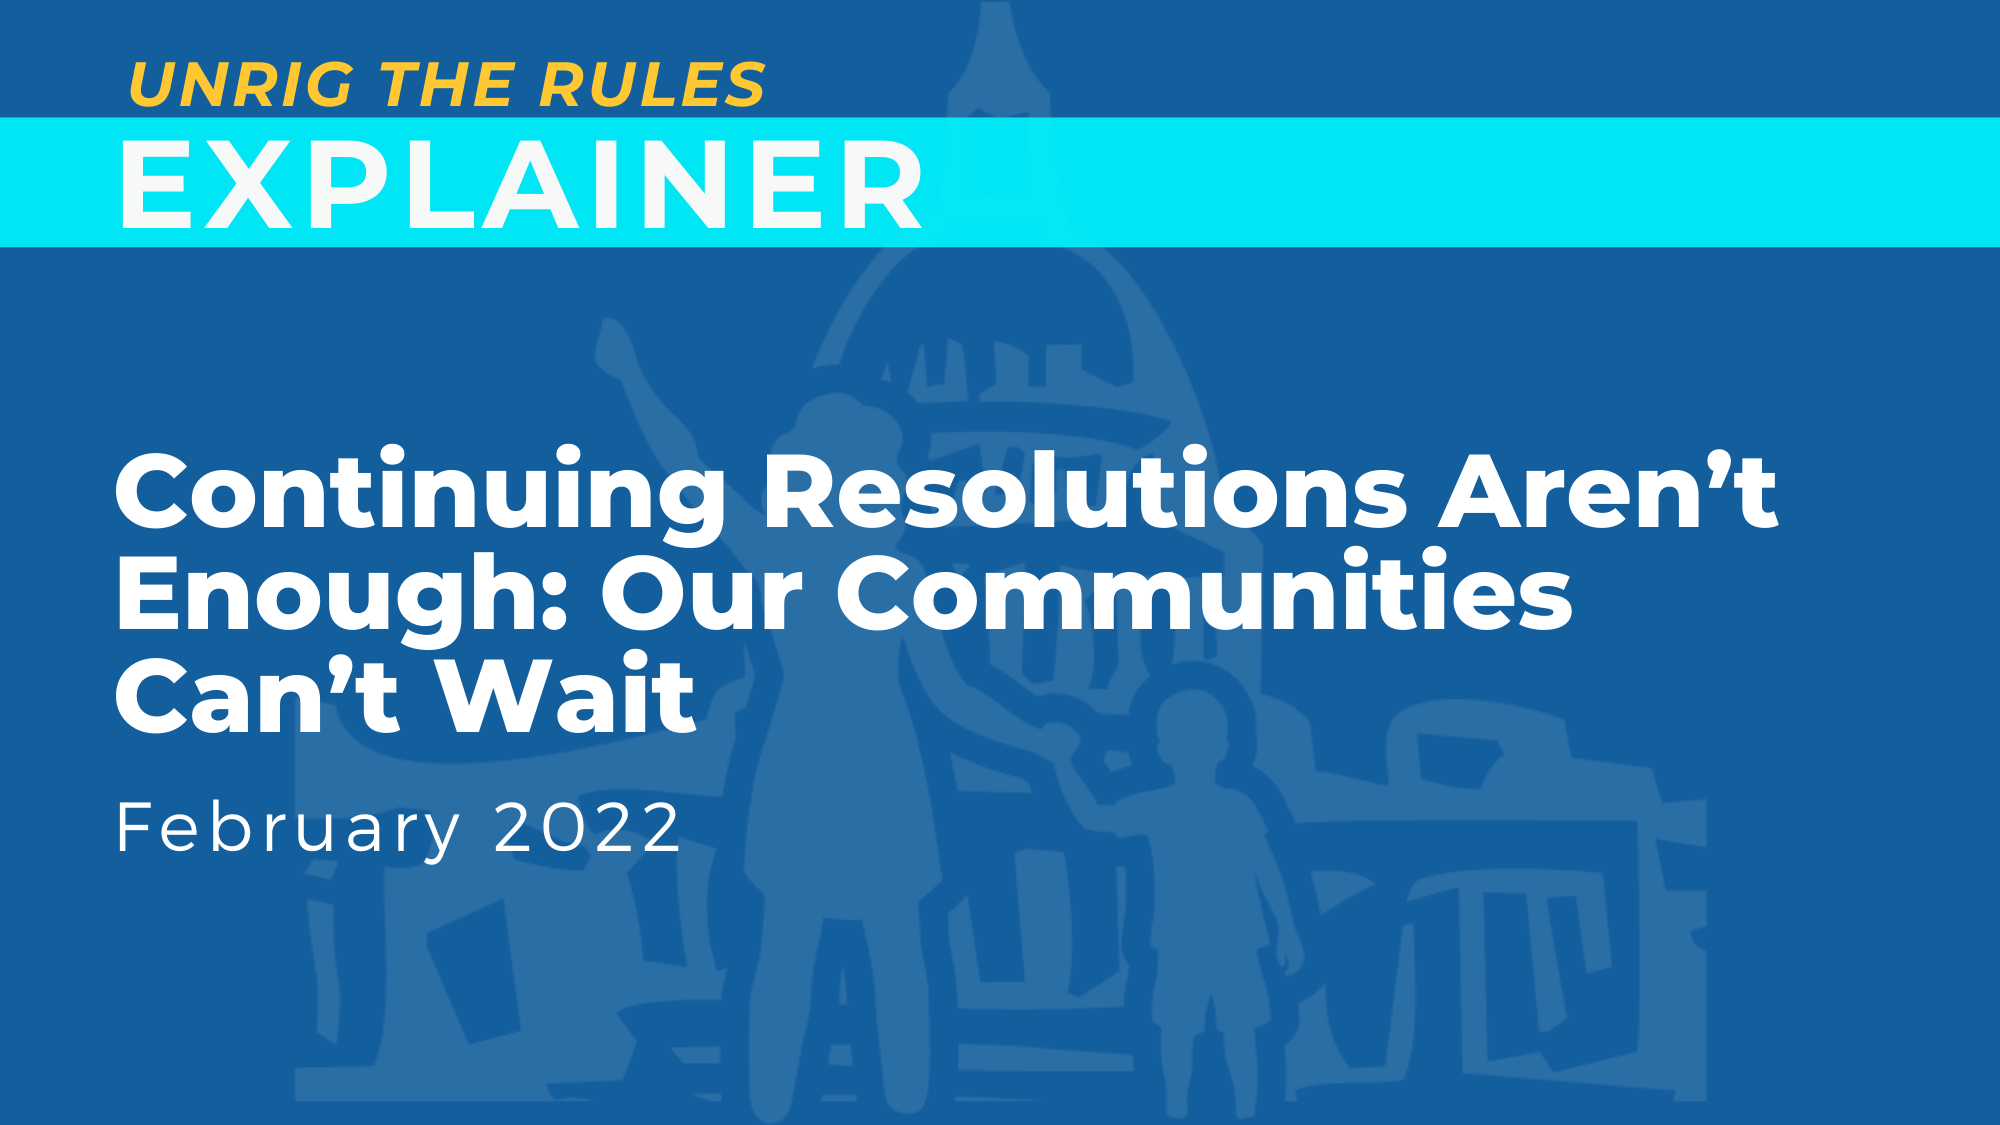 Continuing Resolutions Aren’t Enough: Our Communities Can’t Wait